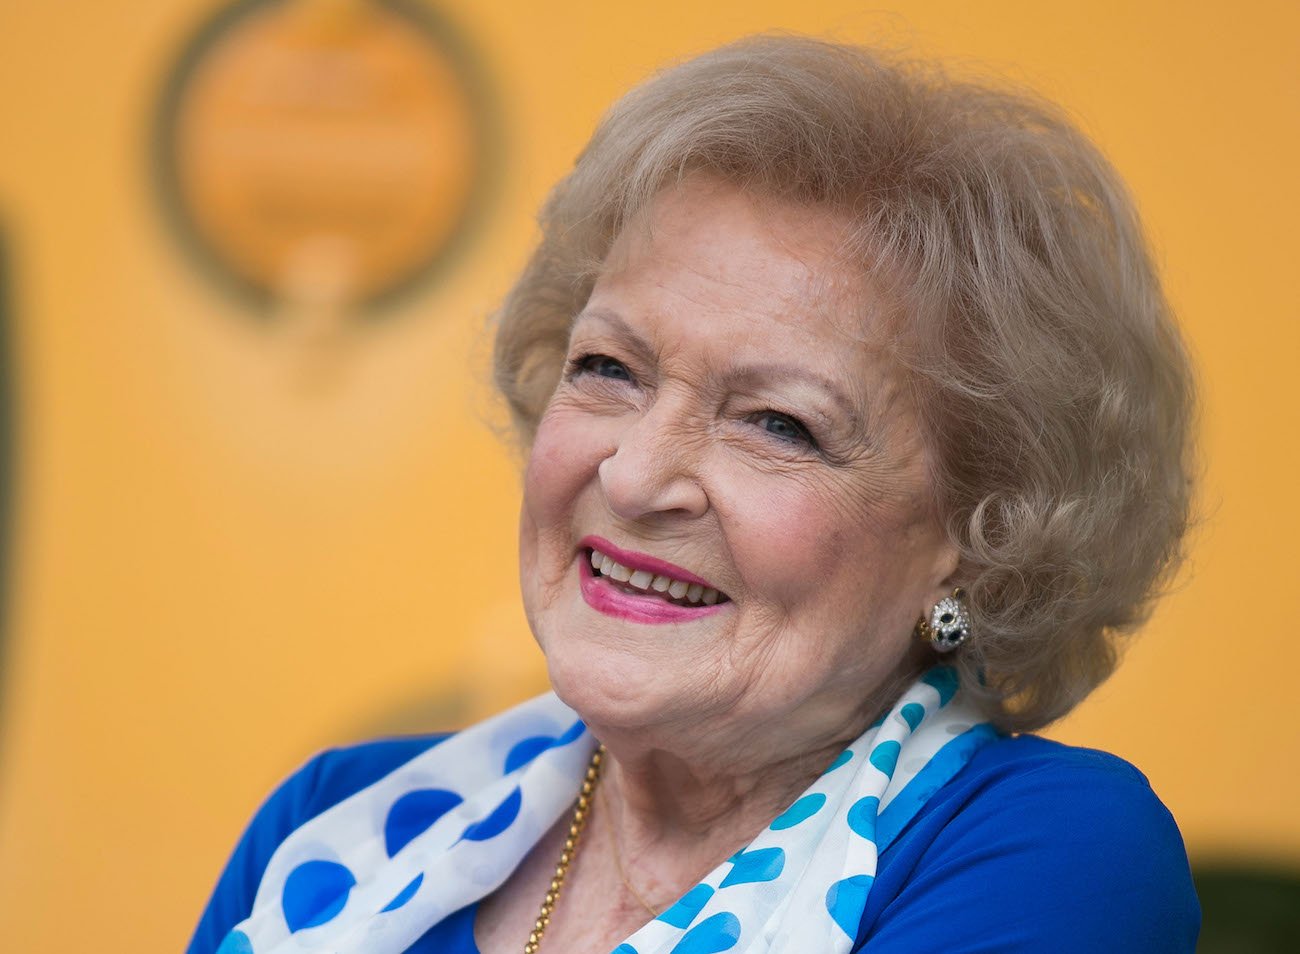 Betty White smiling, close up